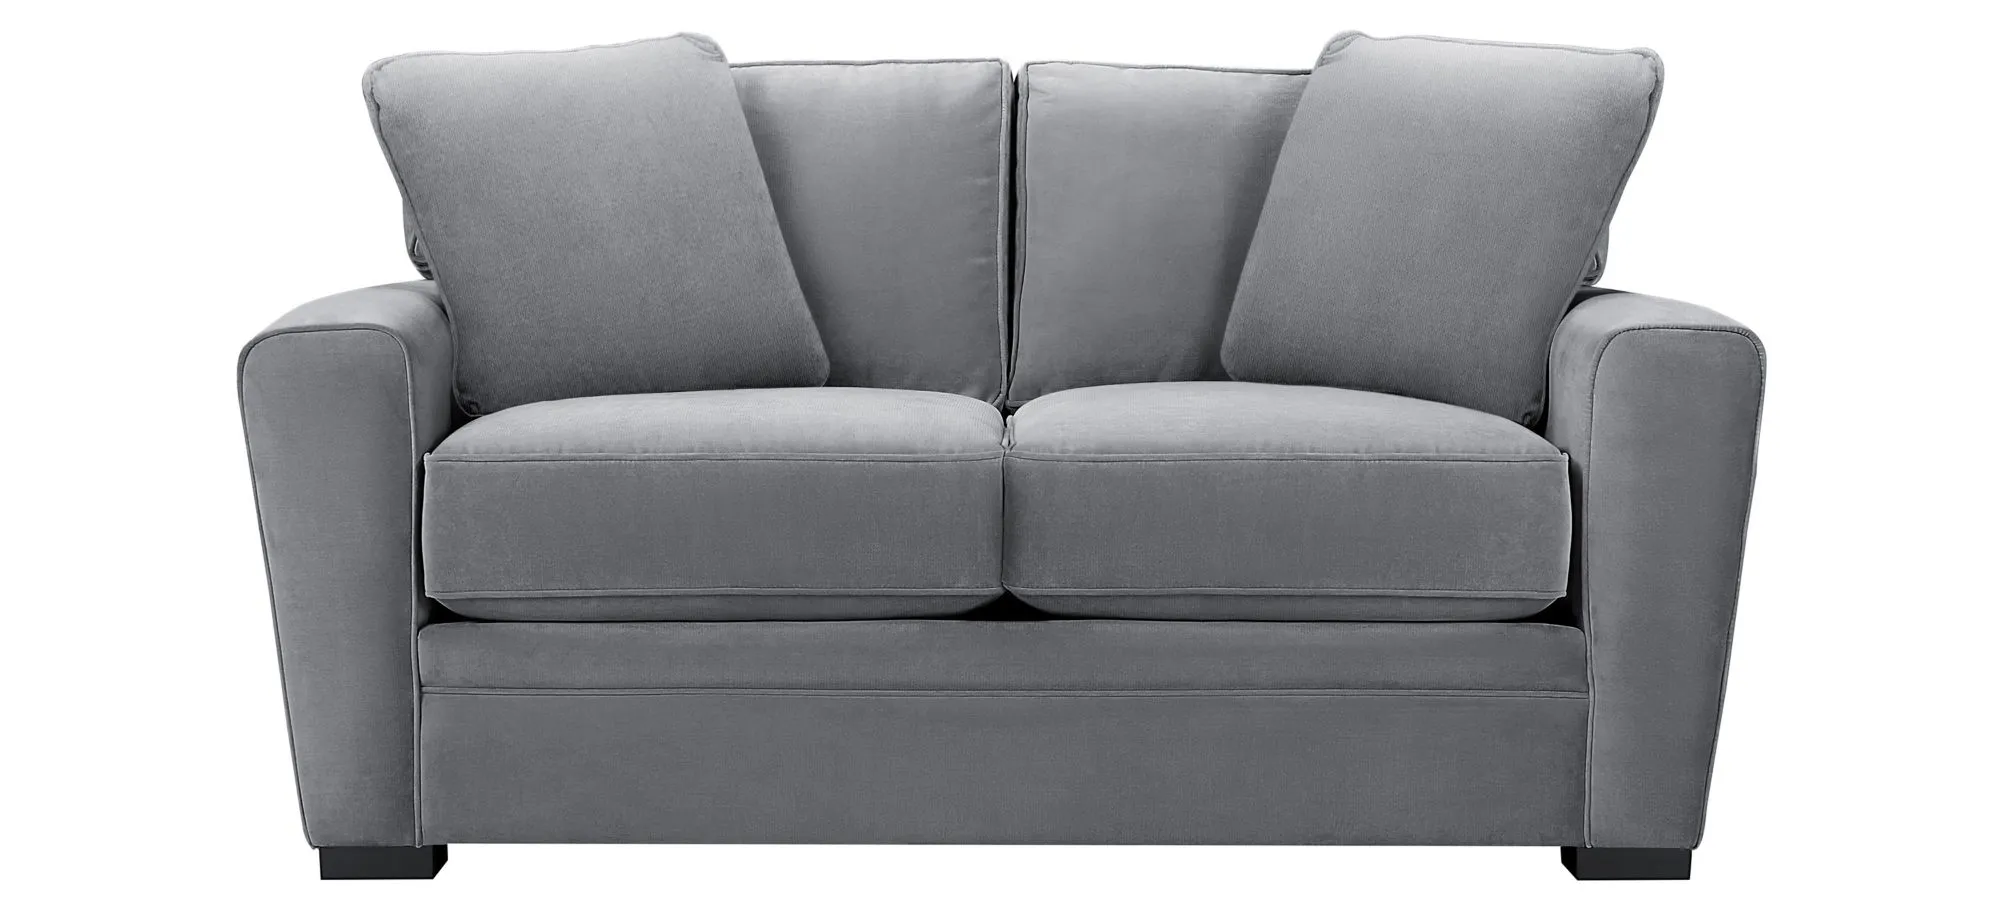 Artemis Loveseat in Gypsy Smoked Pearl by Jonathan Louis